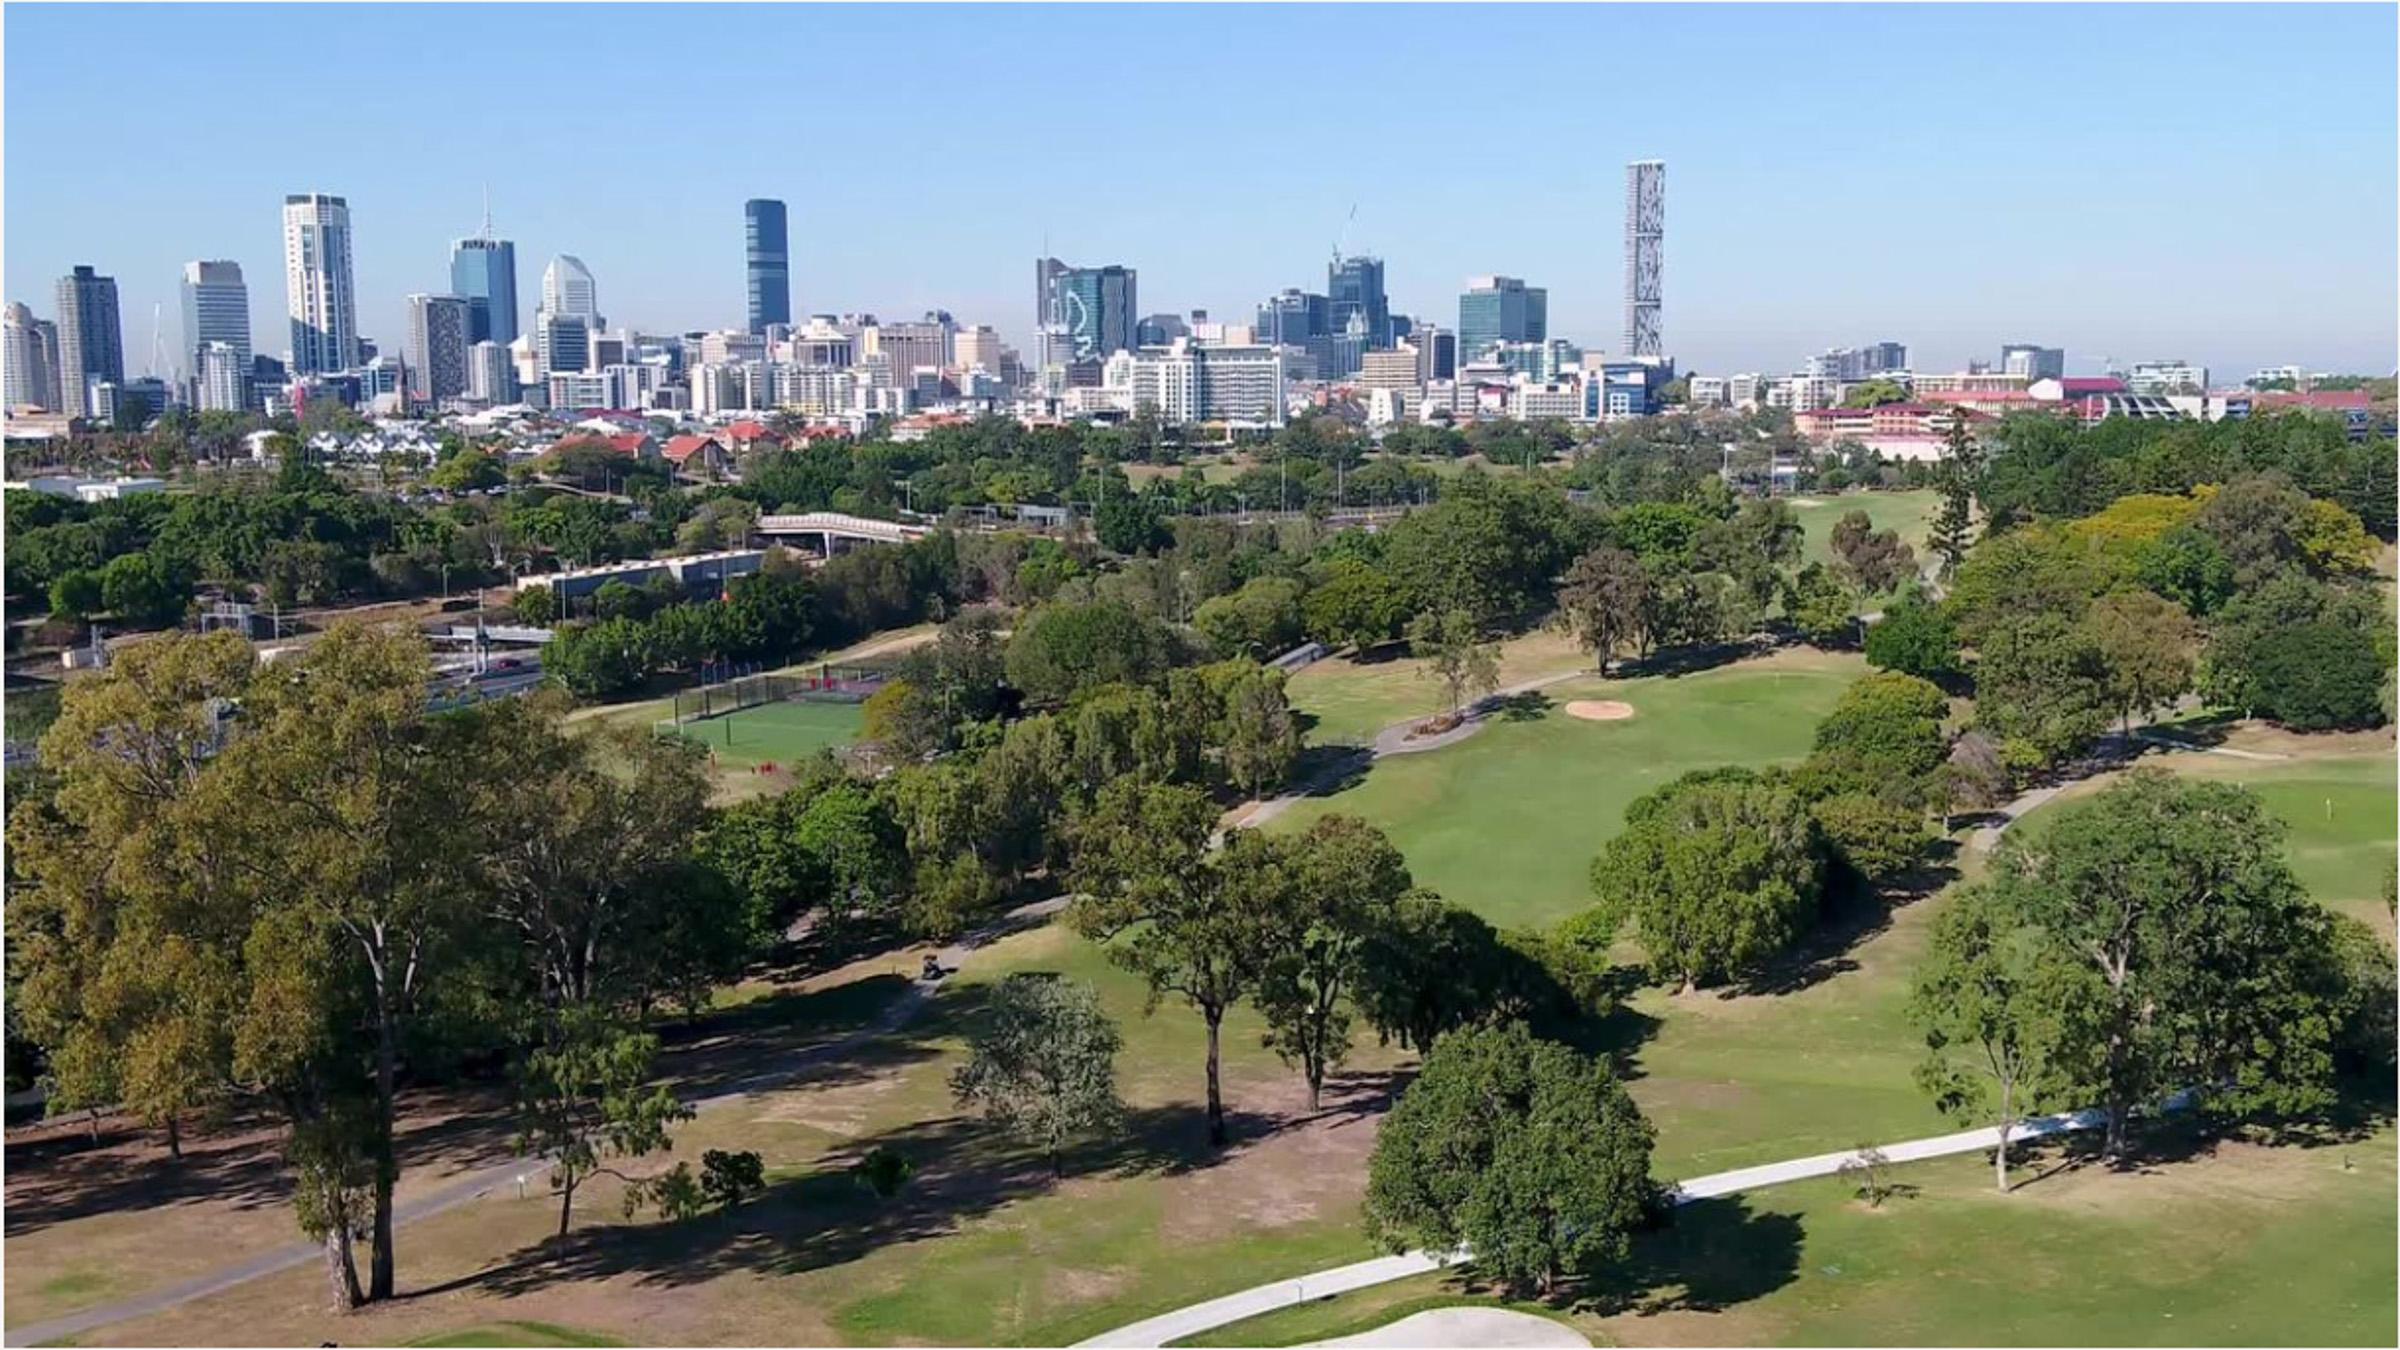 Aerial shot of Victoria Park with Brisbane city in the background